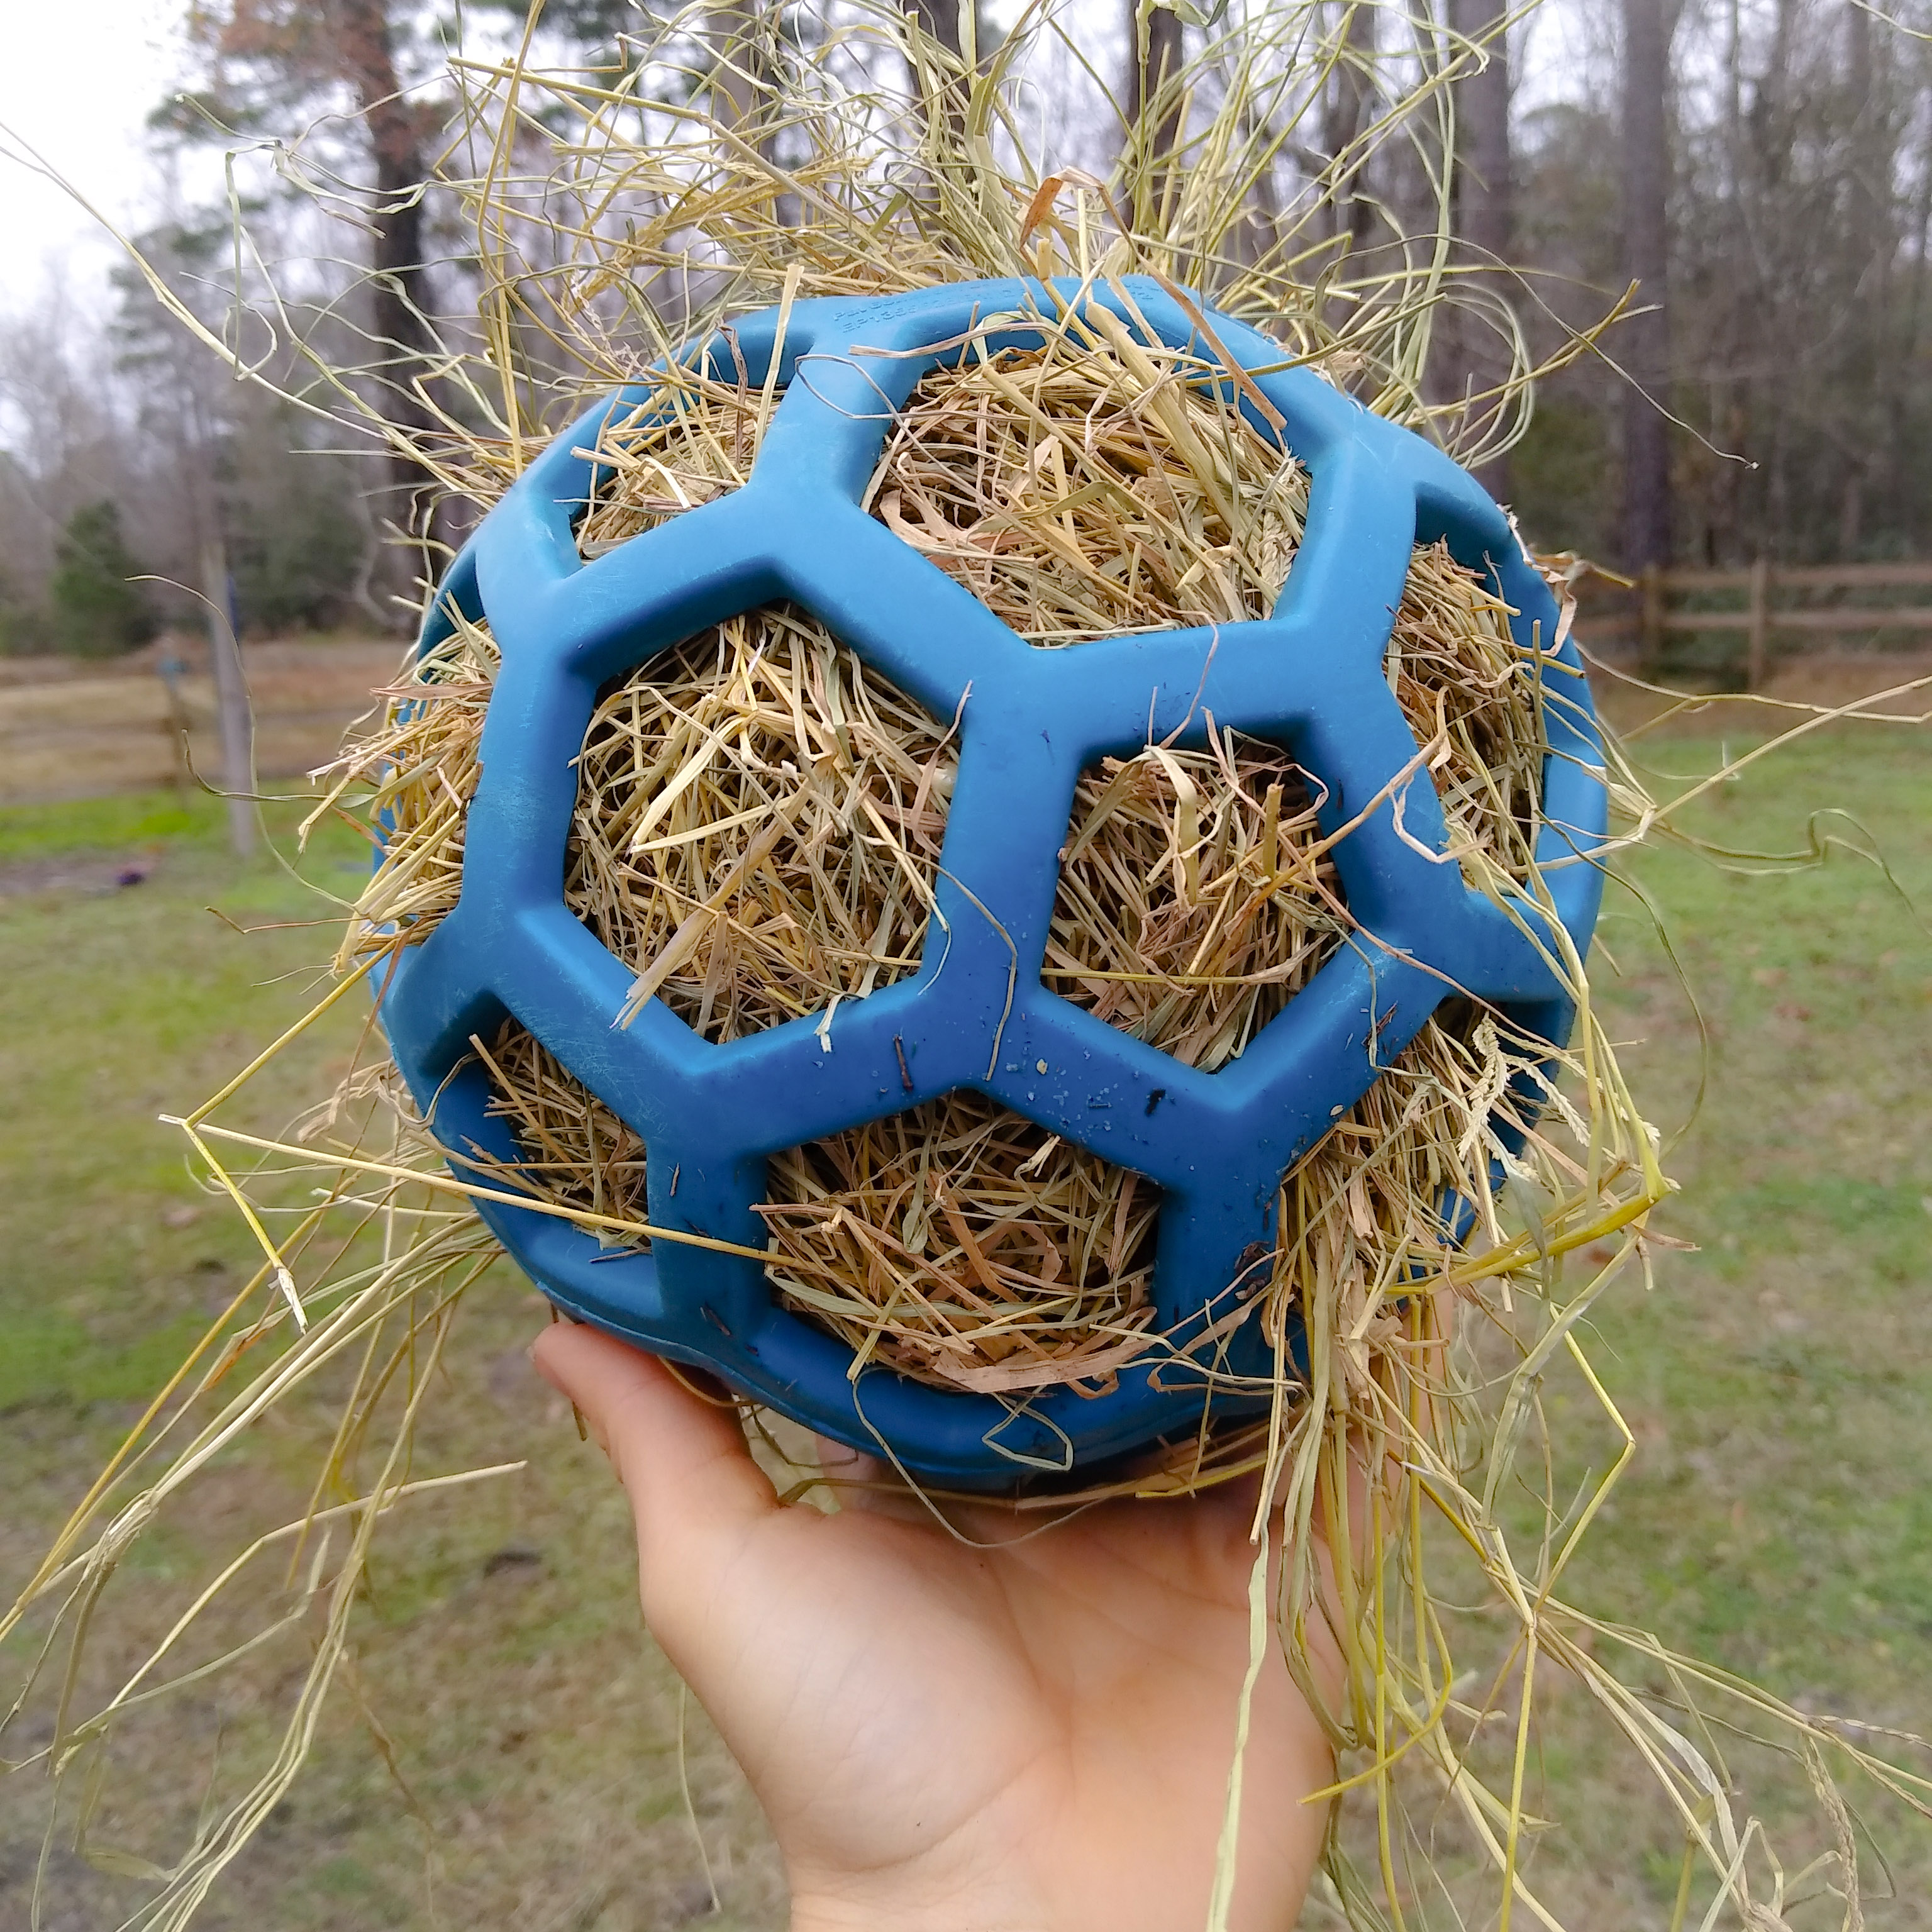 A webby ball enrichment filled with hay and carrots for horses.